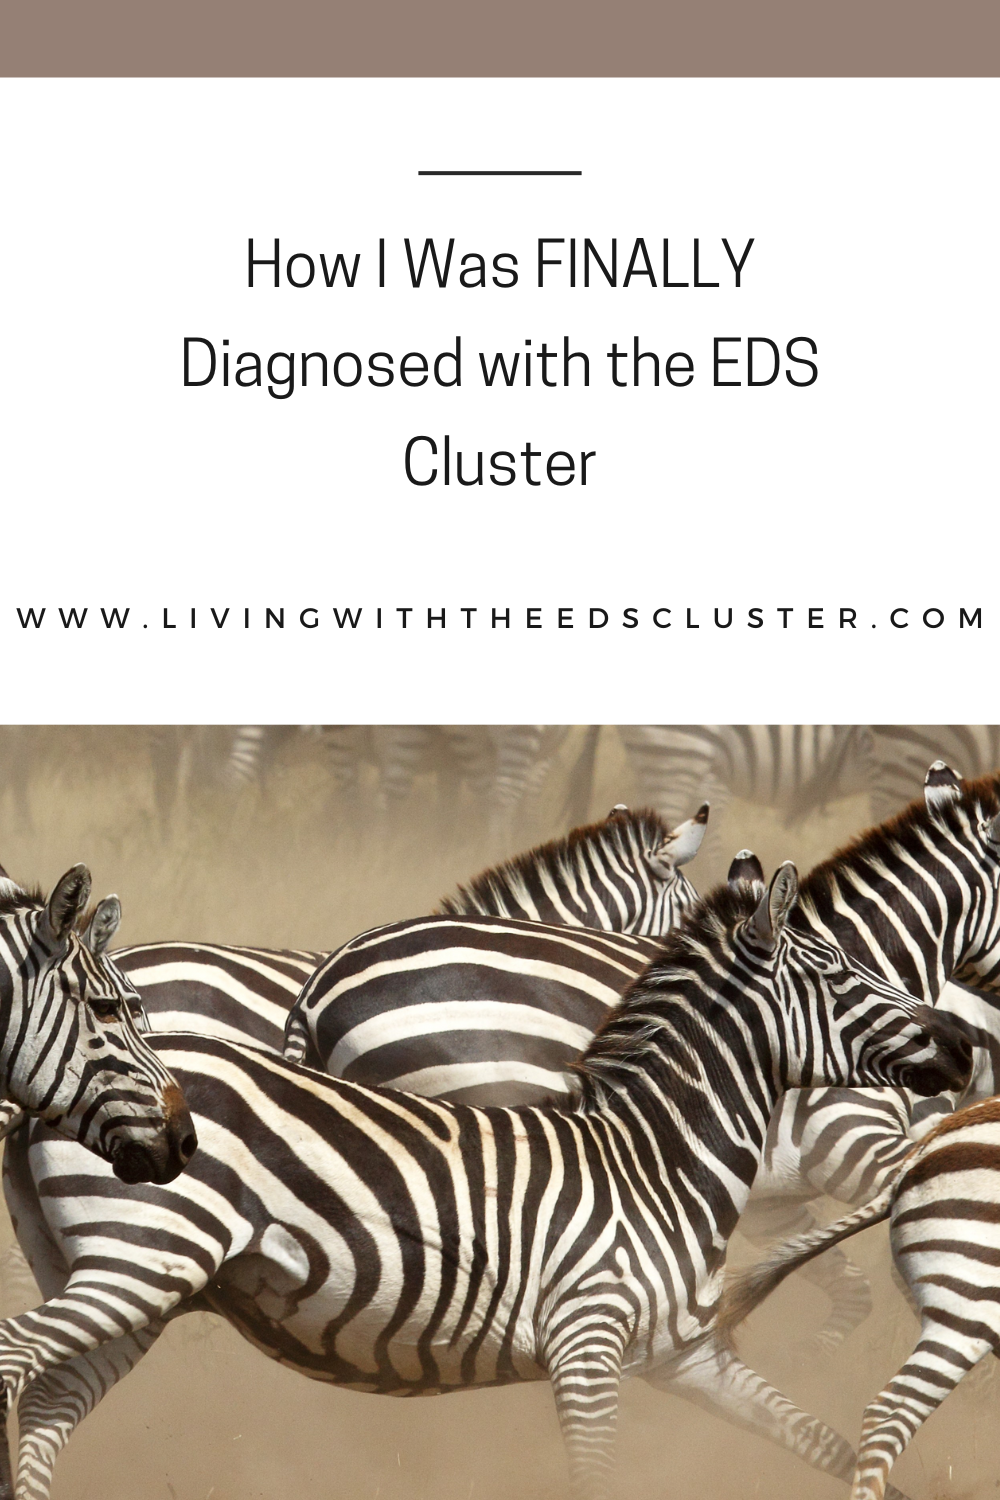 How I was FINALLY Diagnosed with the EDS Cluster